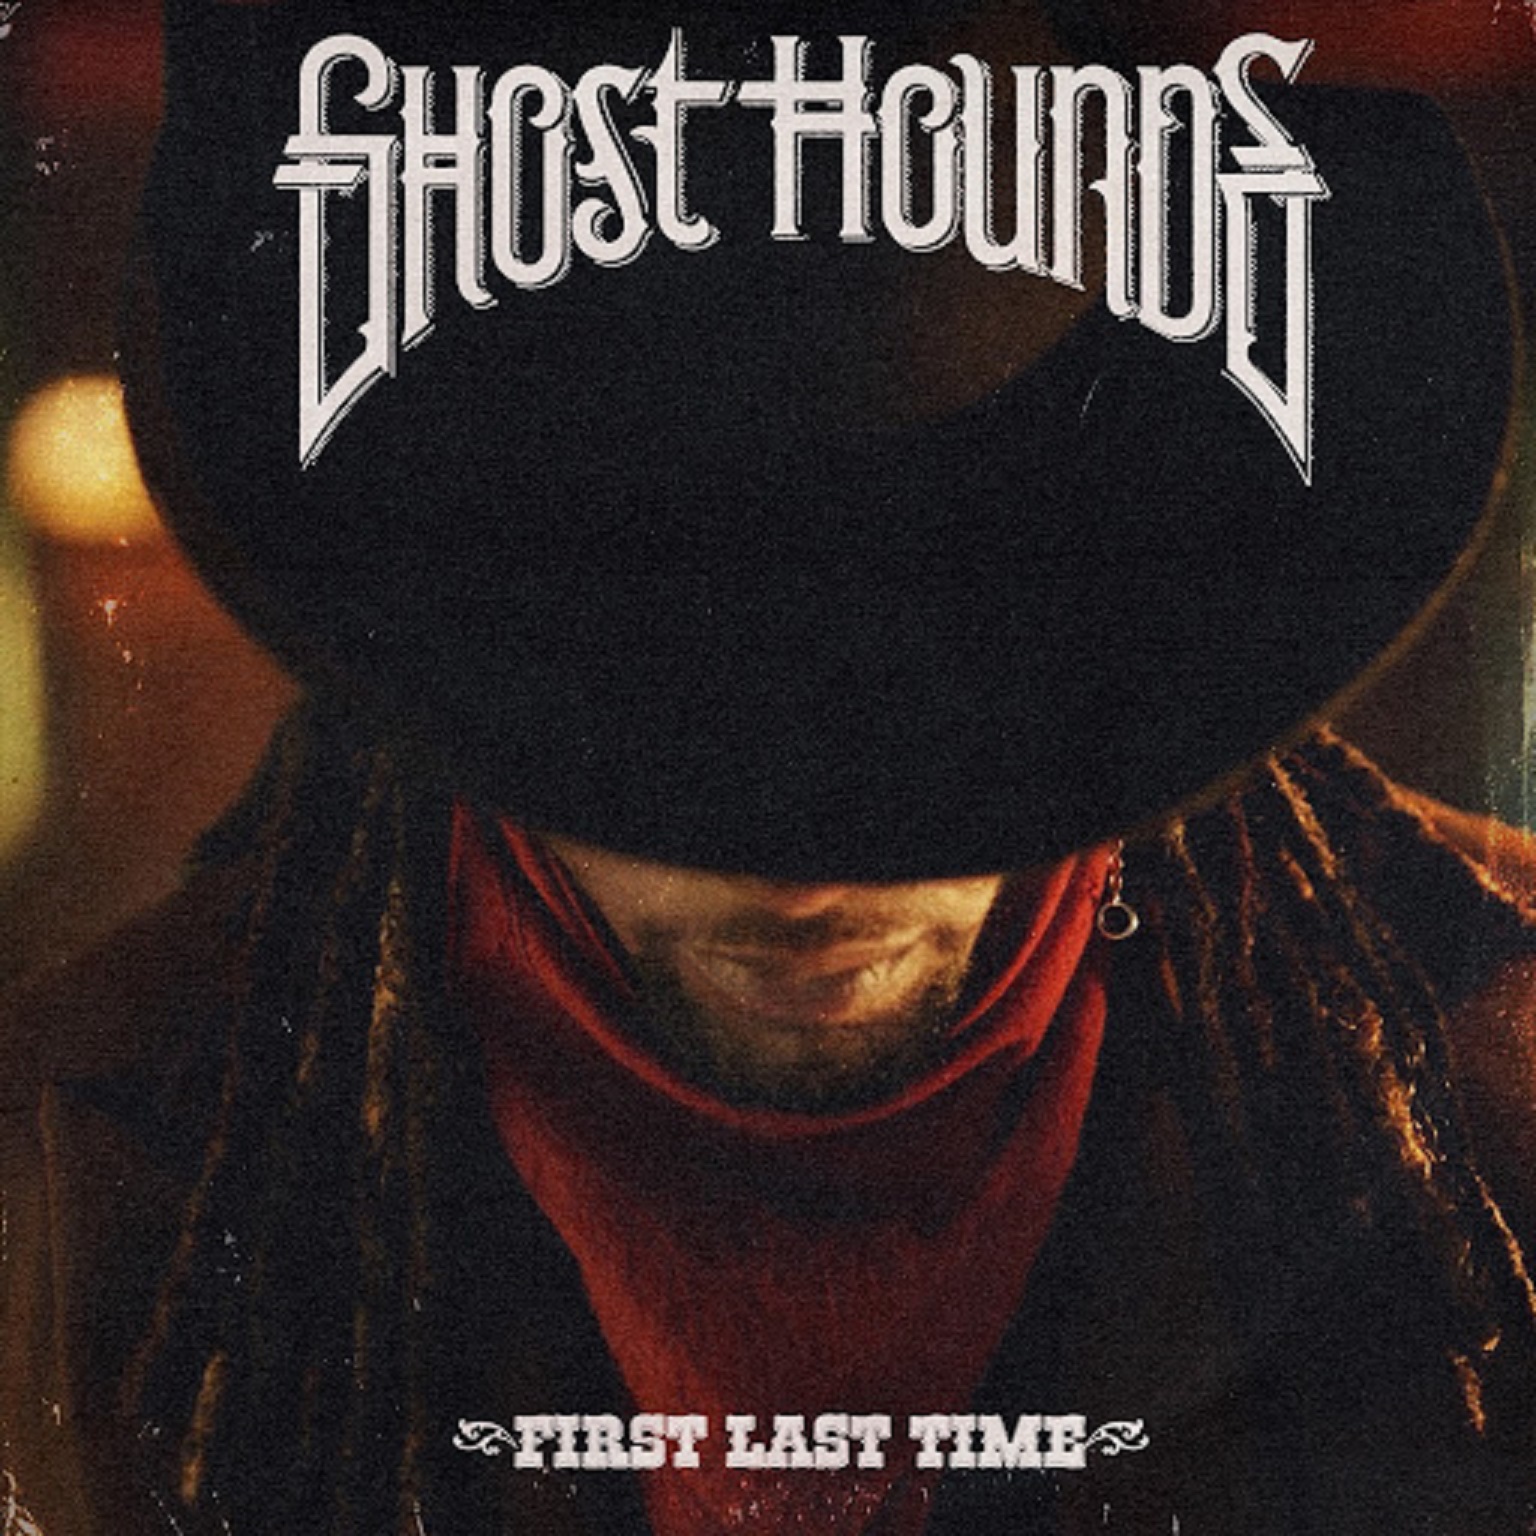 GHOST HOUNDS RELEASE NEW ALBUM VIA GIBSON RECORDS 'FIRST LAST TIME